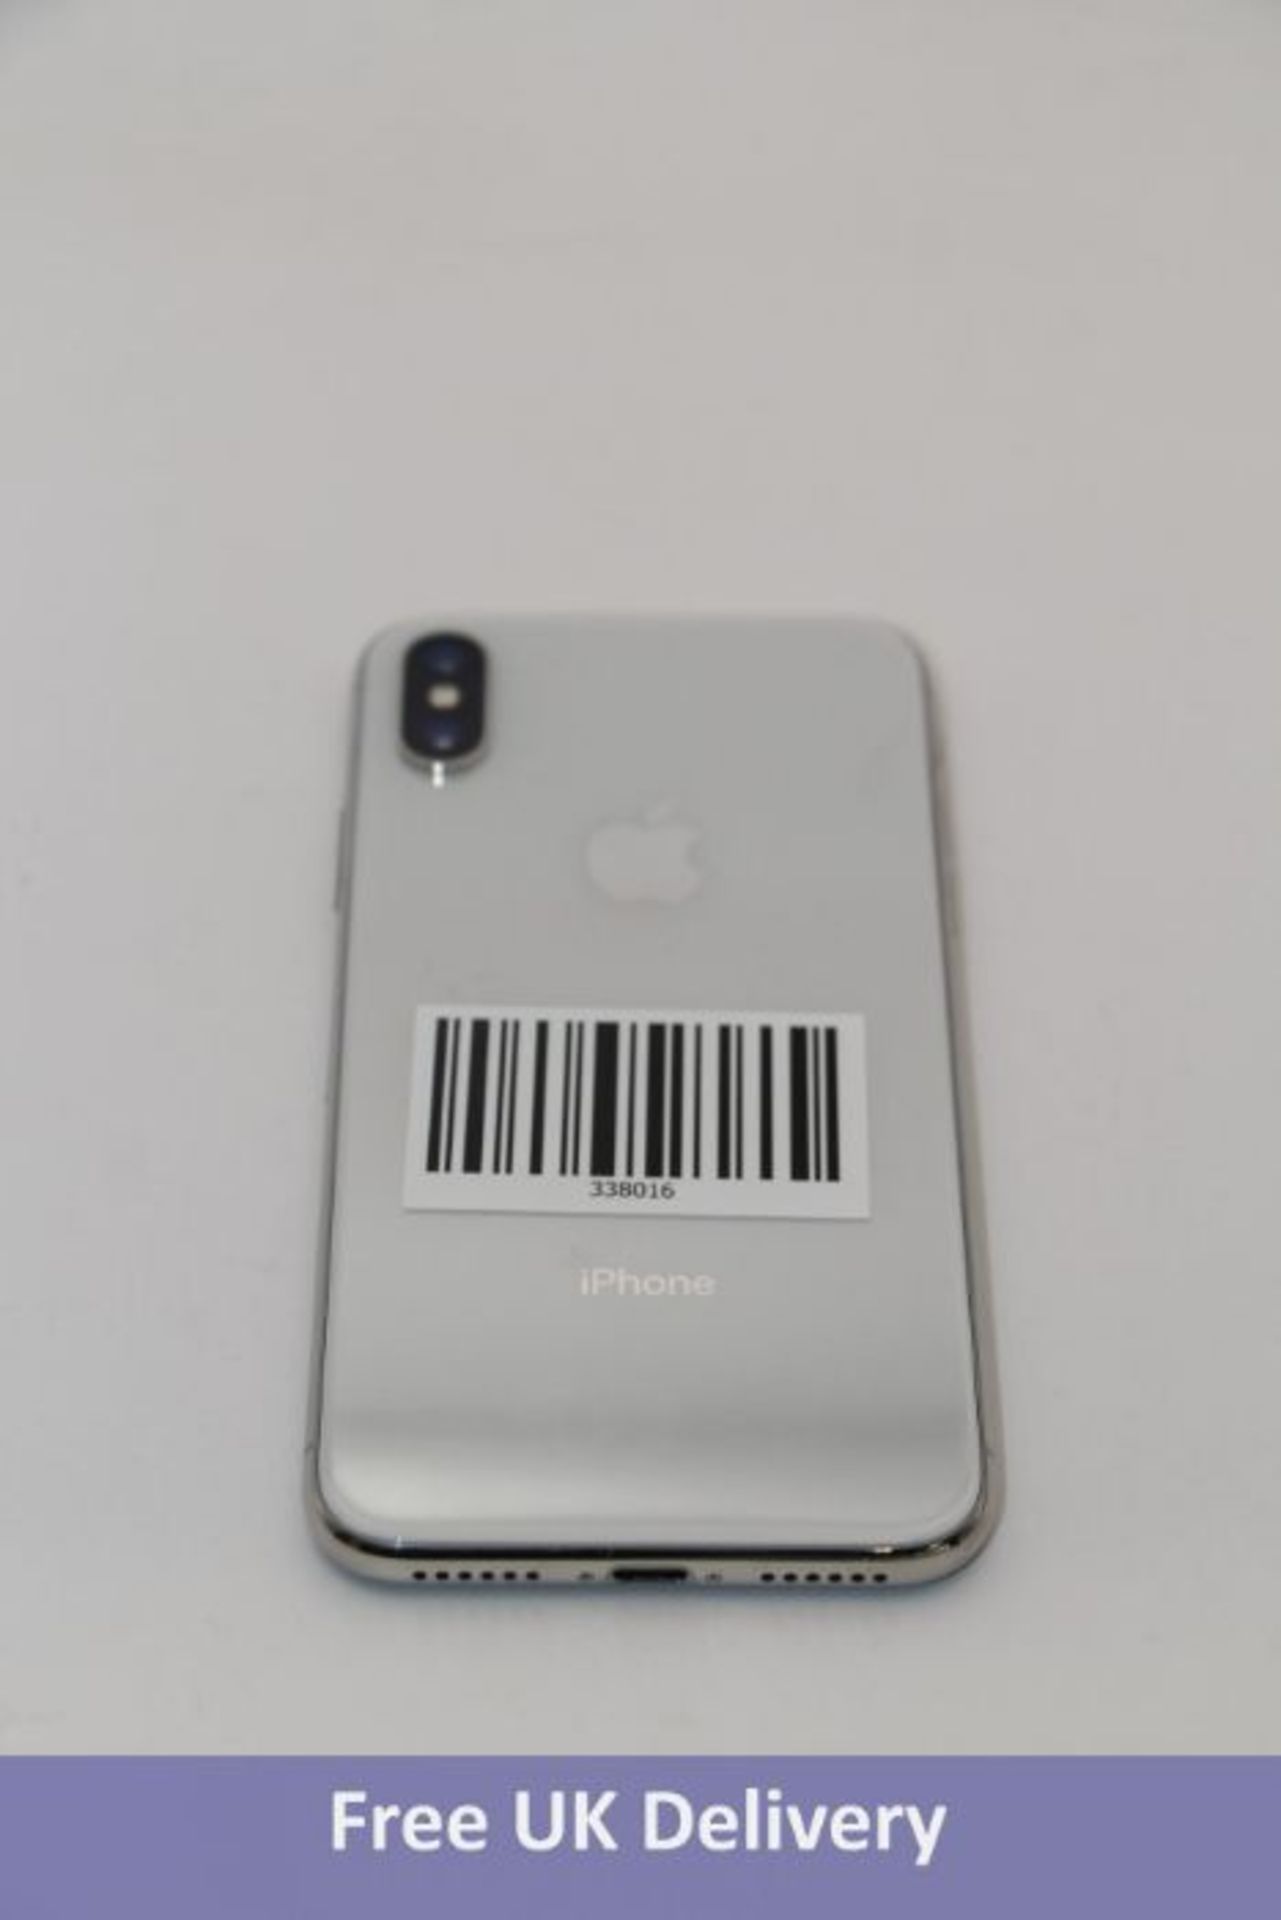 Apple iPhone X 64GB, Silver, A1865. Used, refurbished, no box or accessories. Checkmend clear, ref. - Image 2 of 2